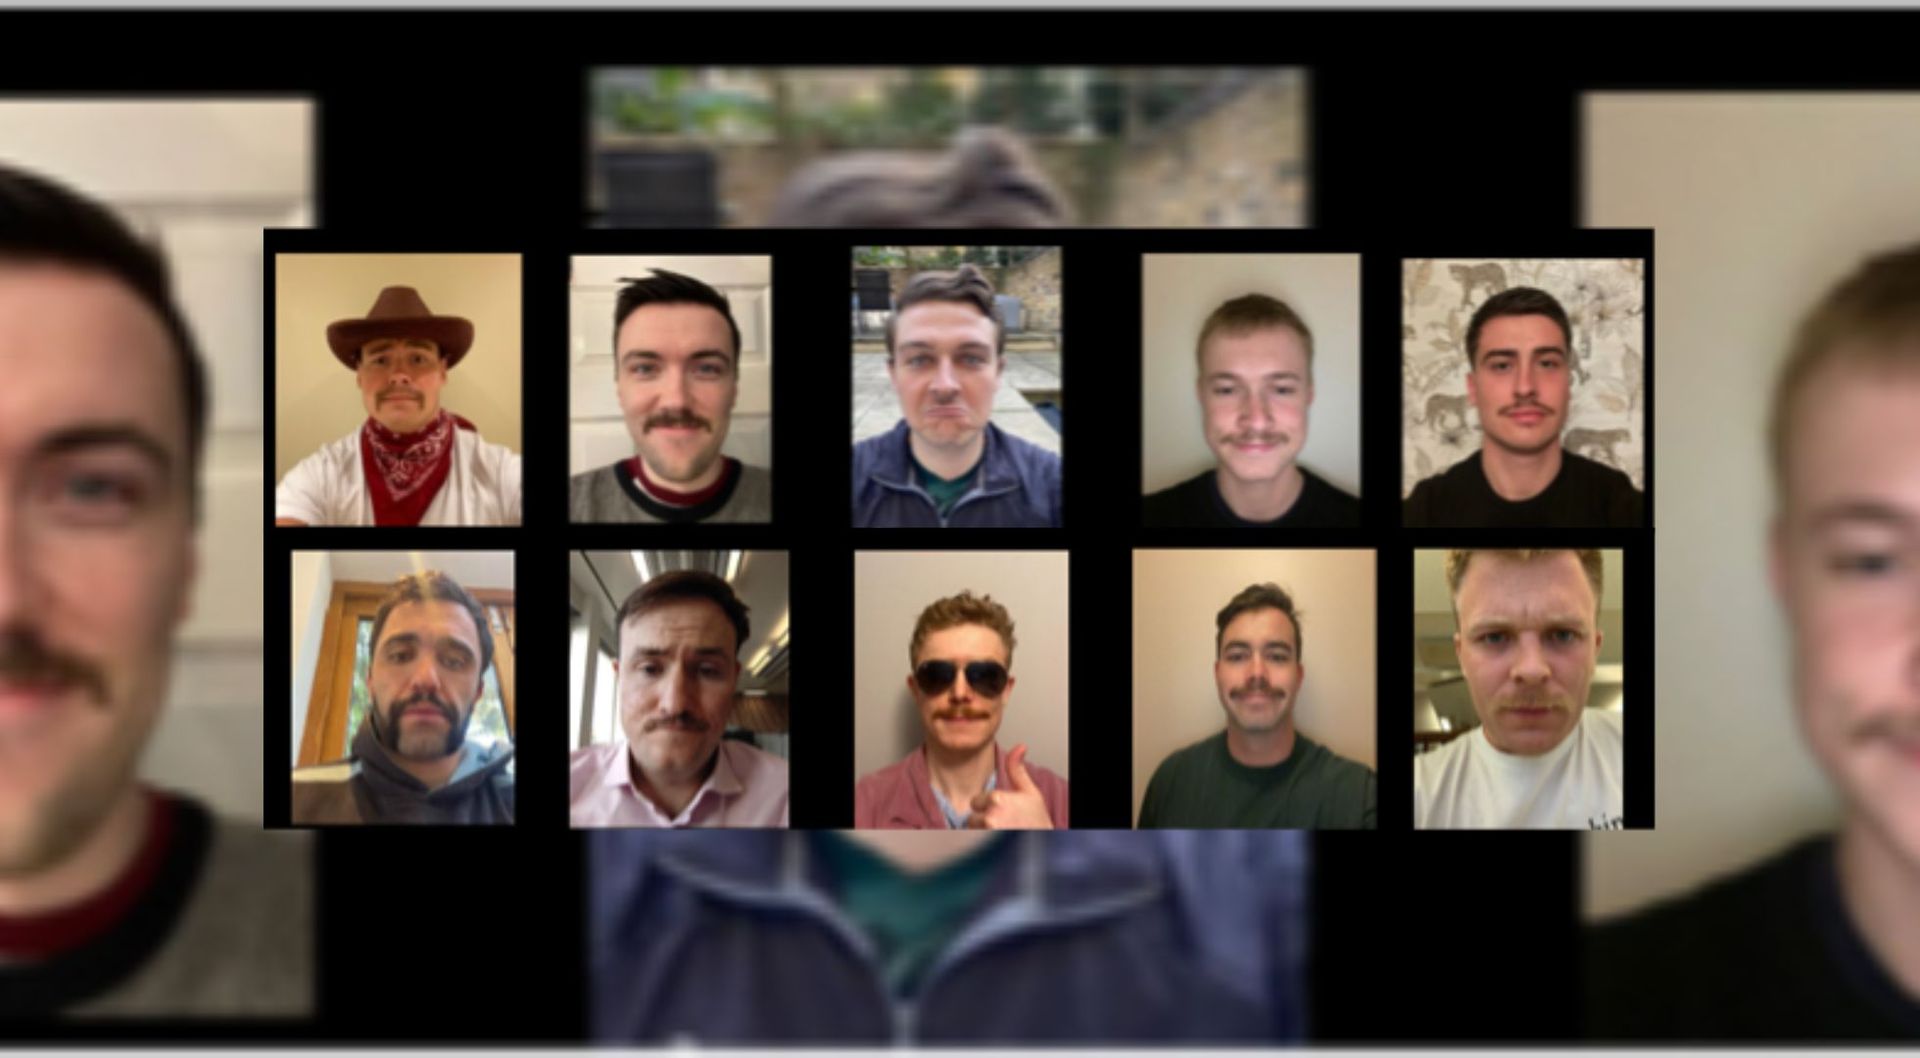 BDO staff on zoom, showing off their moustaches